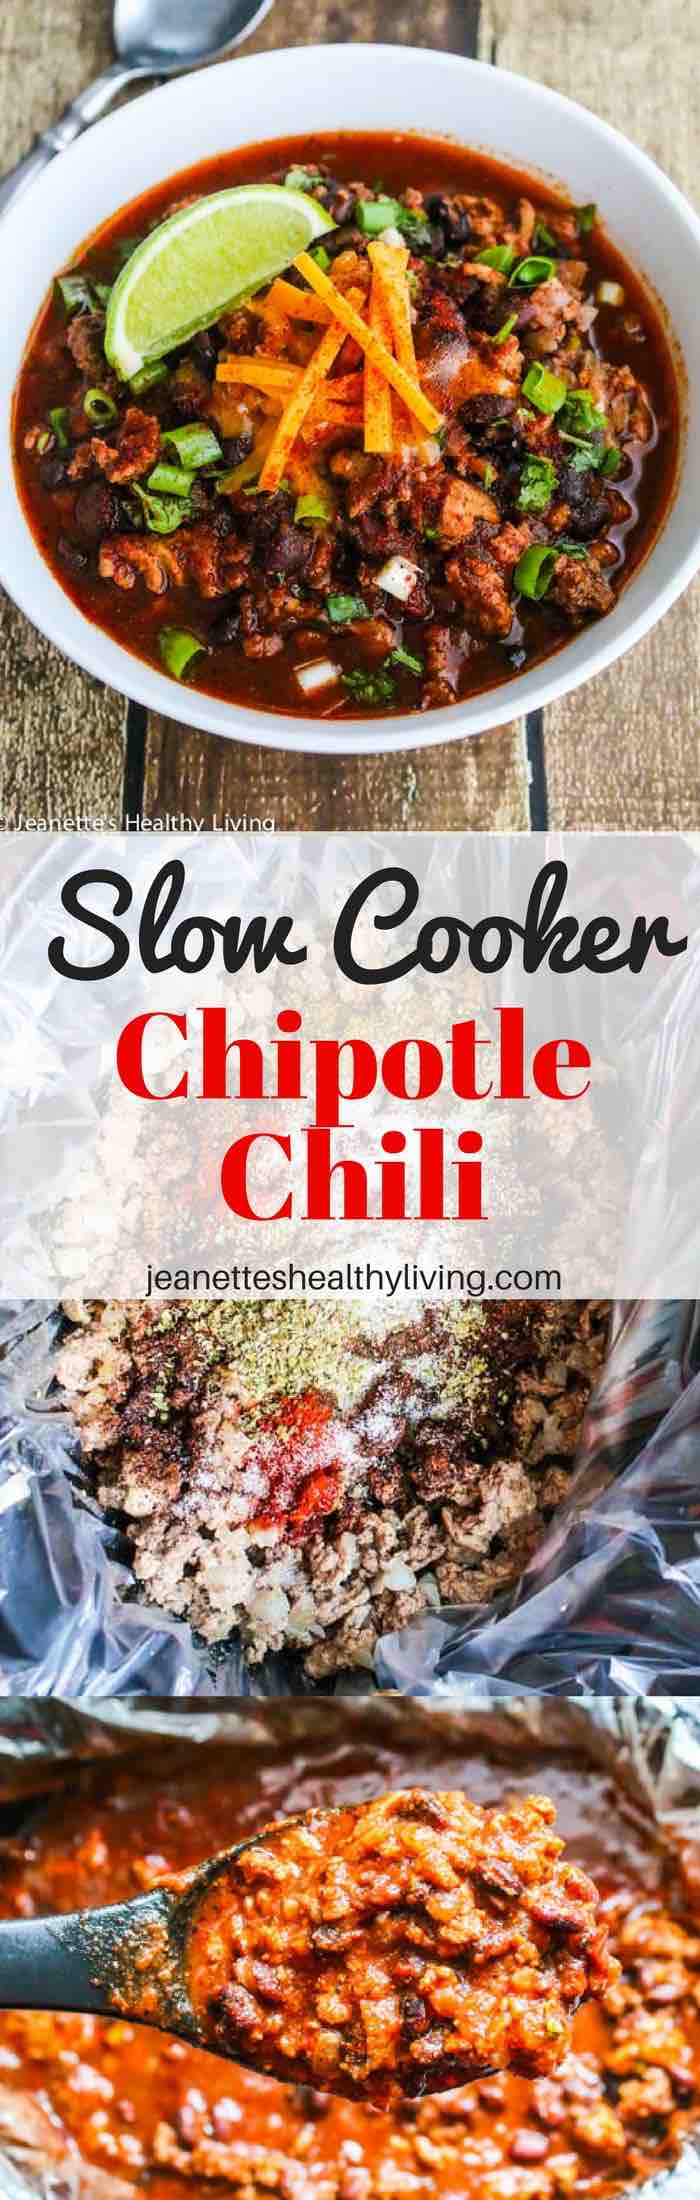 GSlow Cooker Chipotle Chili - smoky and delicious, this chili recipe is perfect for busy weeknights, lazy weekends and Game Day entertaining.